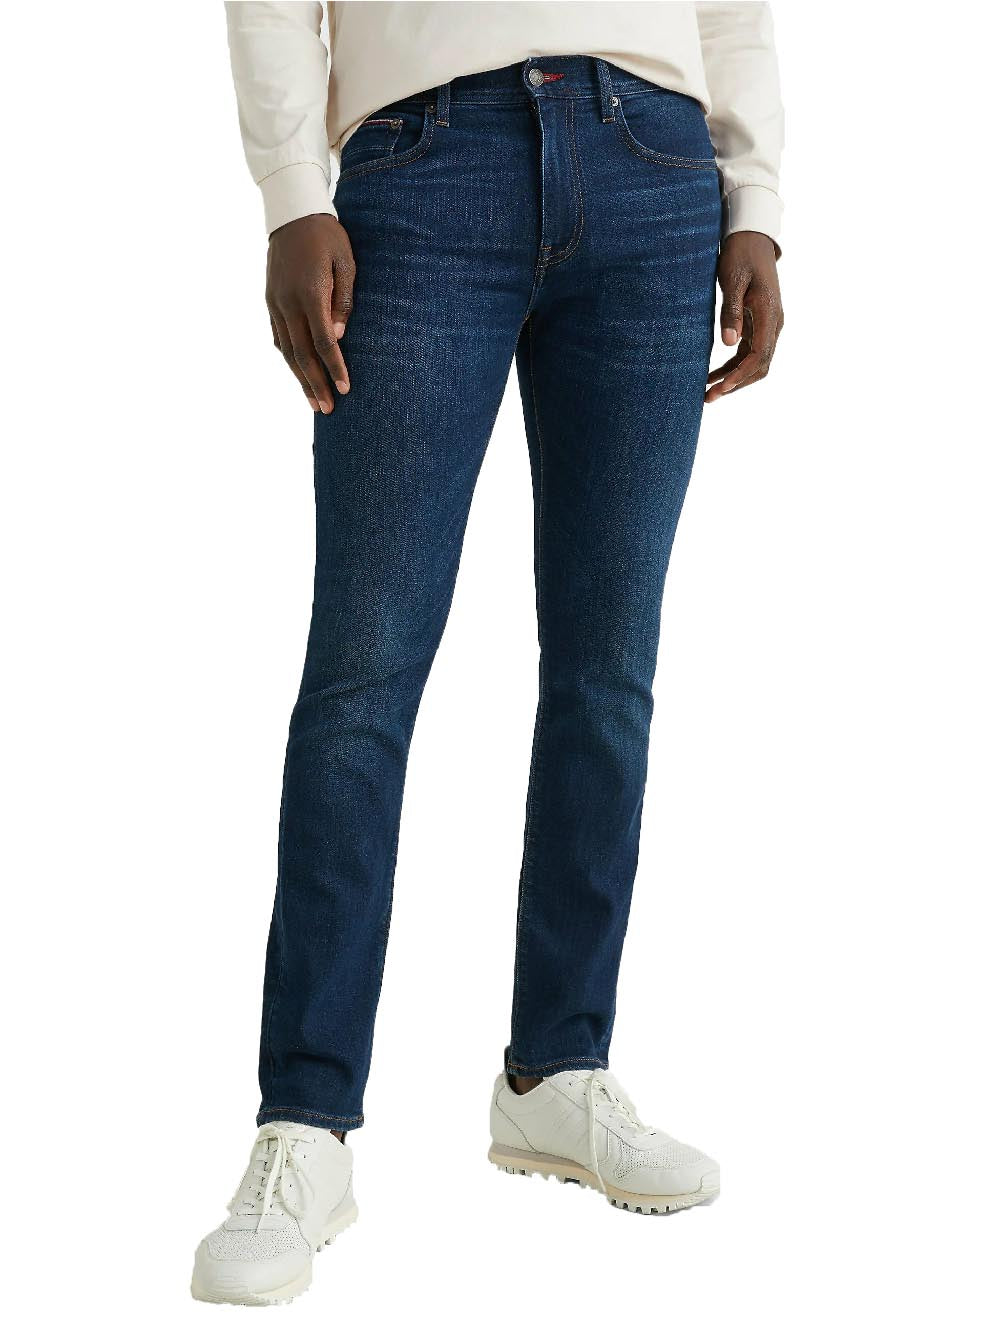 Tommy Hilfiger Jeans Uomo Scuro